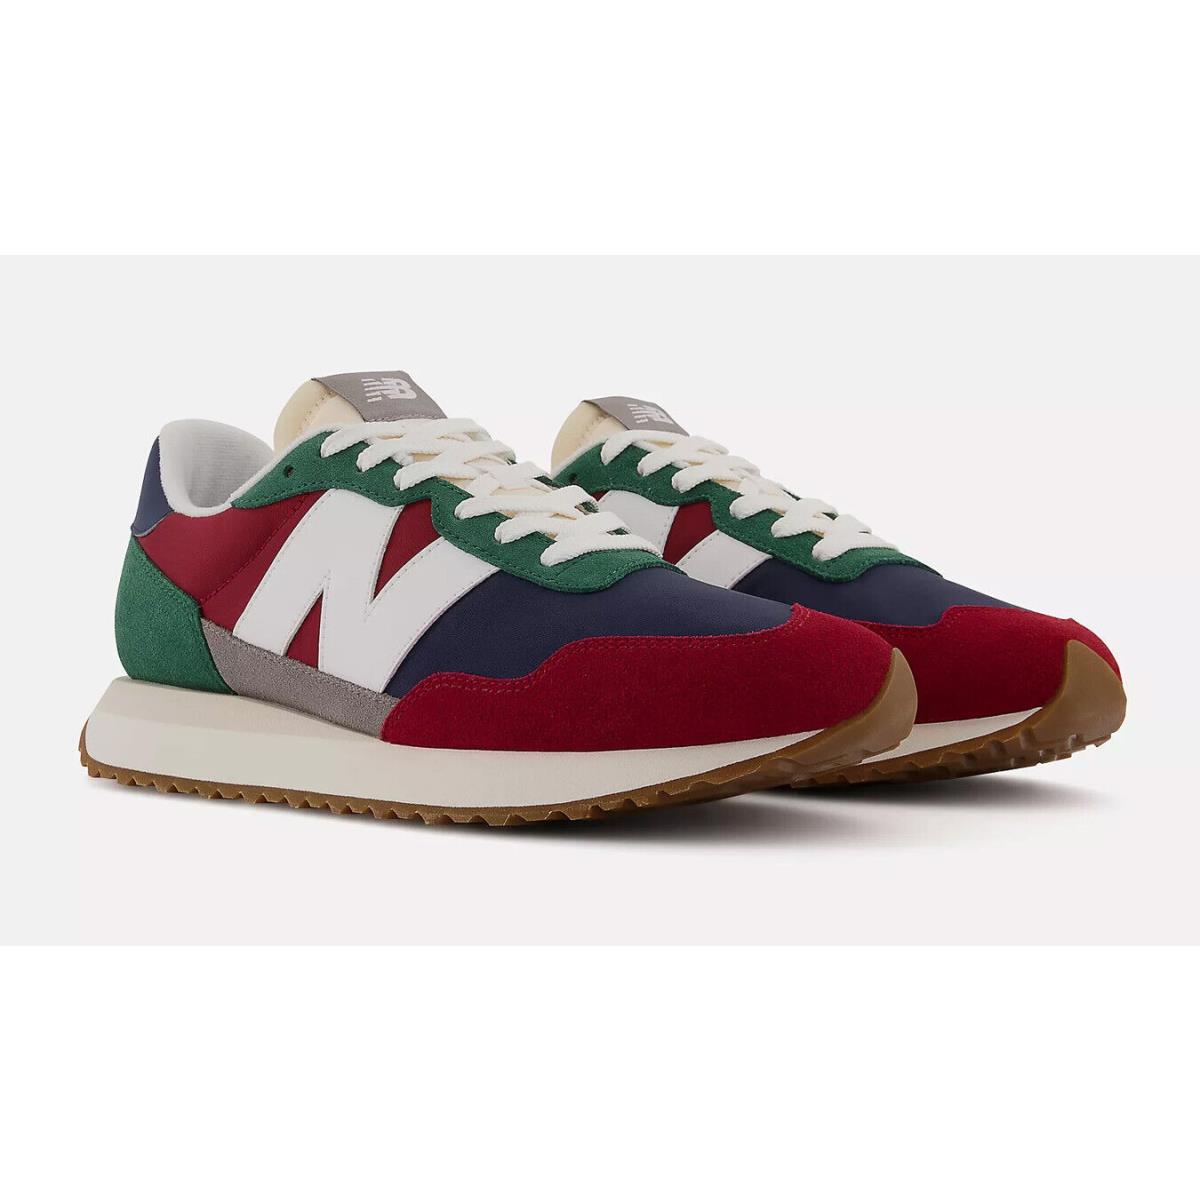 New Balance shoes  - Red/Green/Navy Blue 11